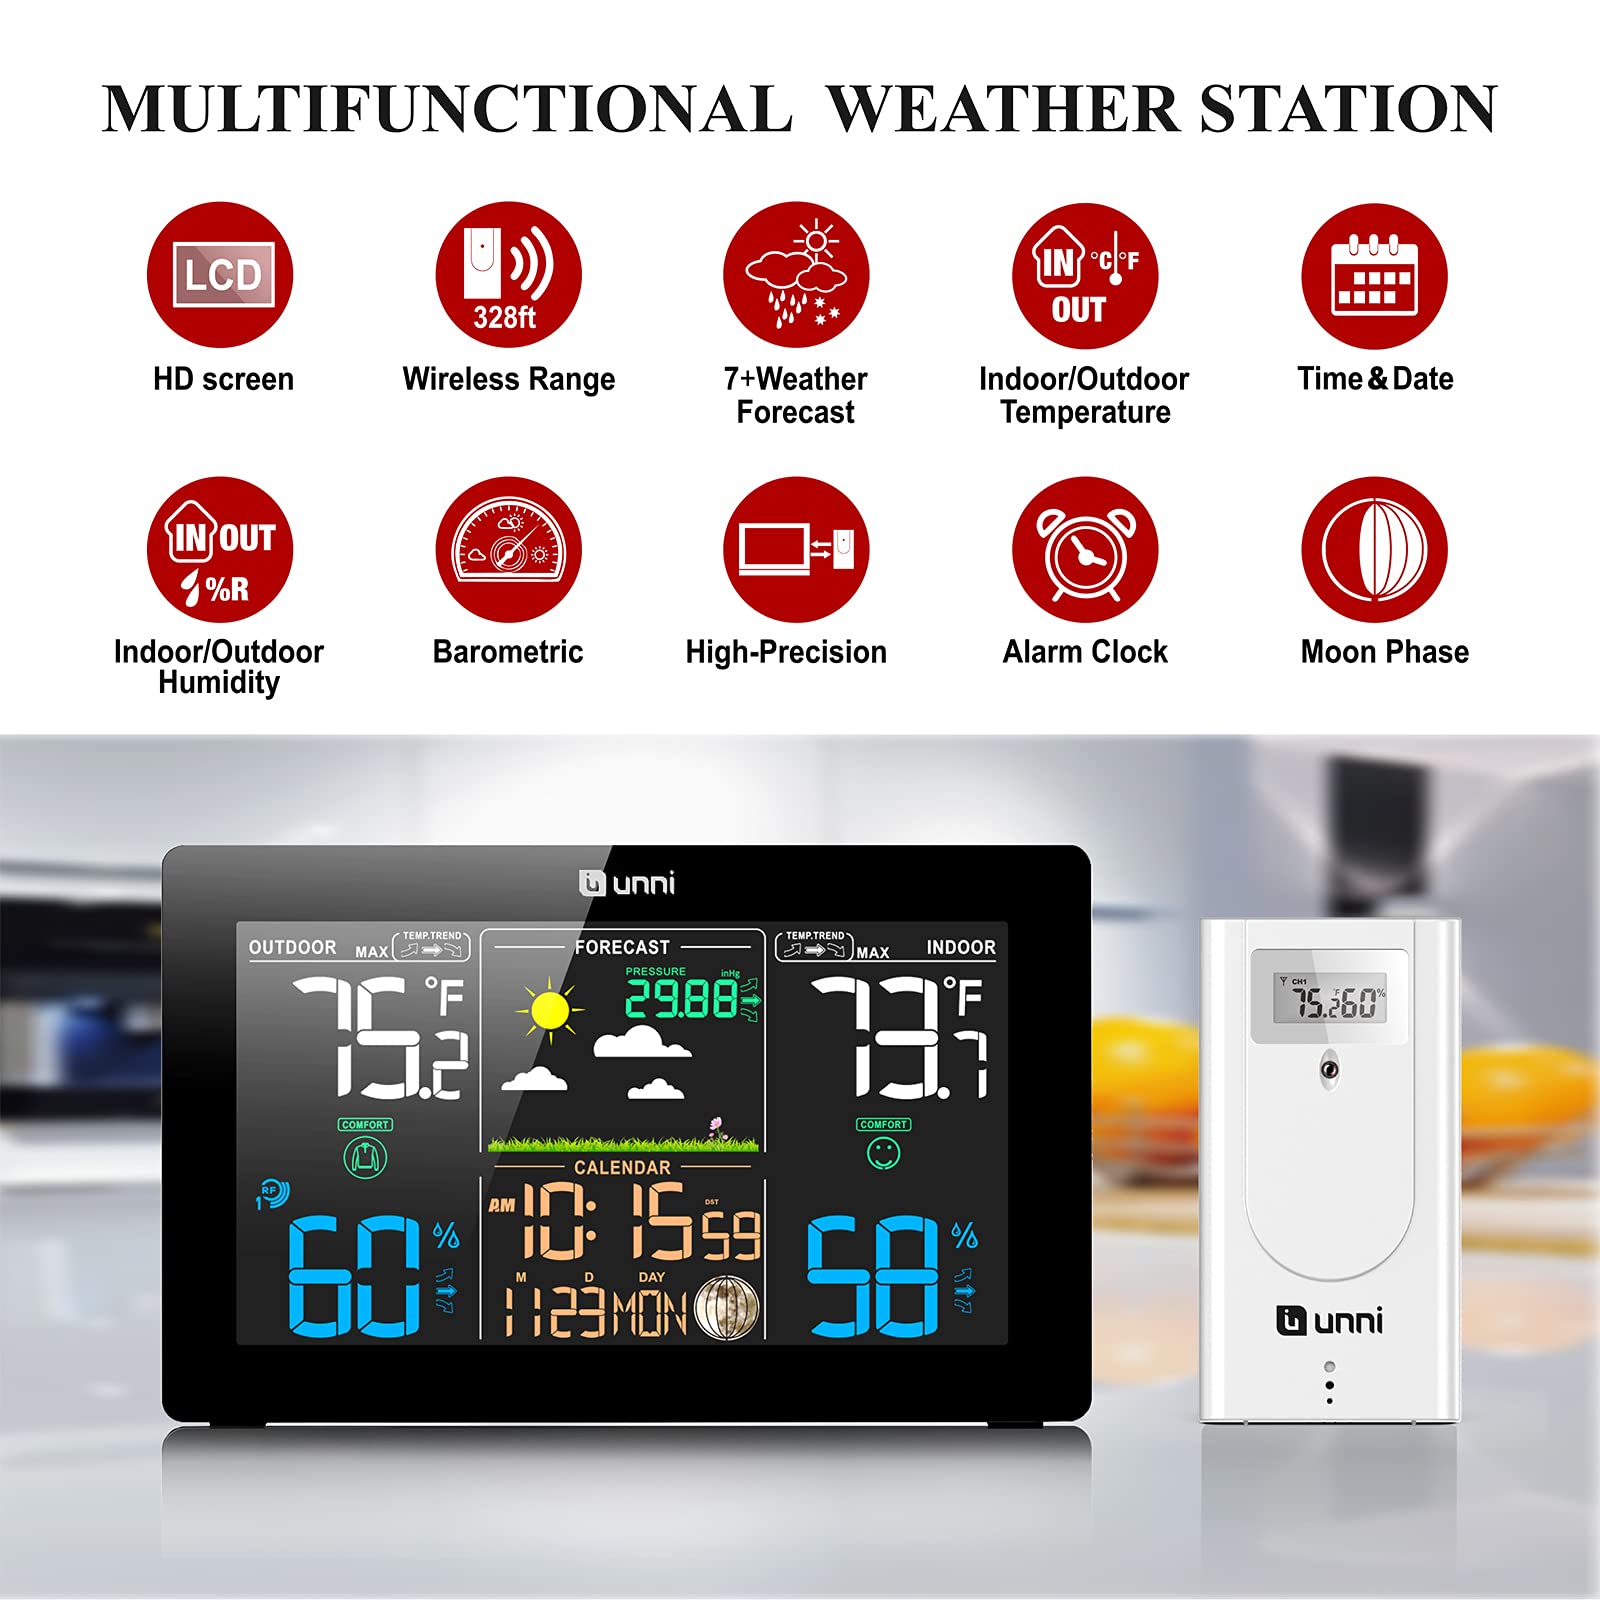 U UNNI Weather Station Wireless Indoor Outdoor Thermometer Inside Outside Temperature Humidity with Calendar and Adjustable Back